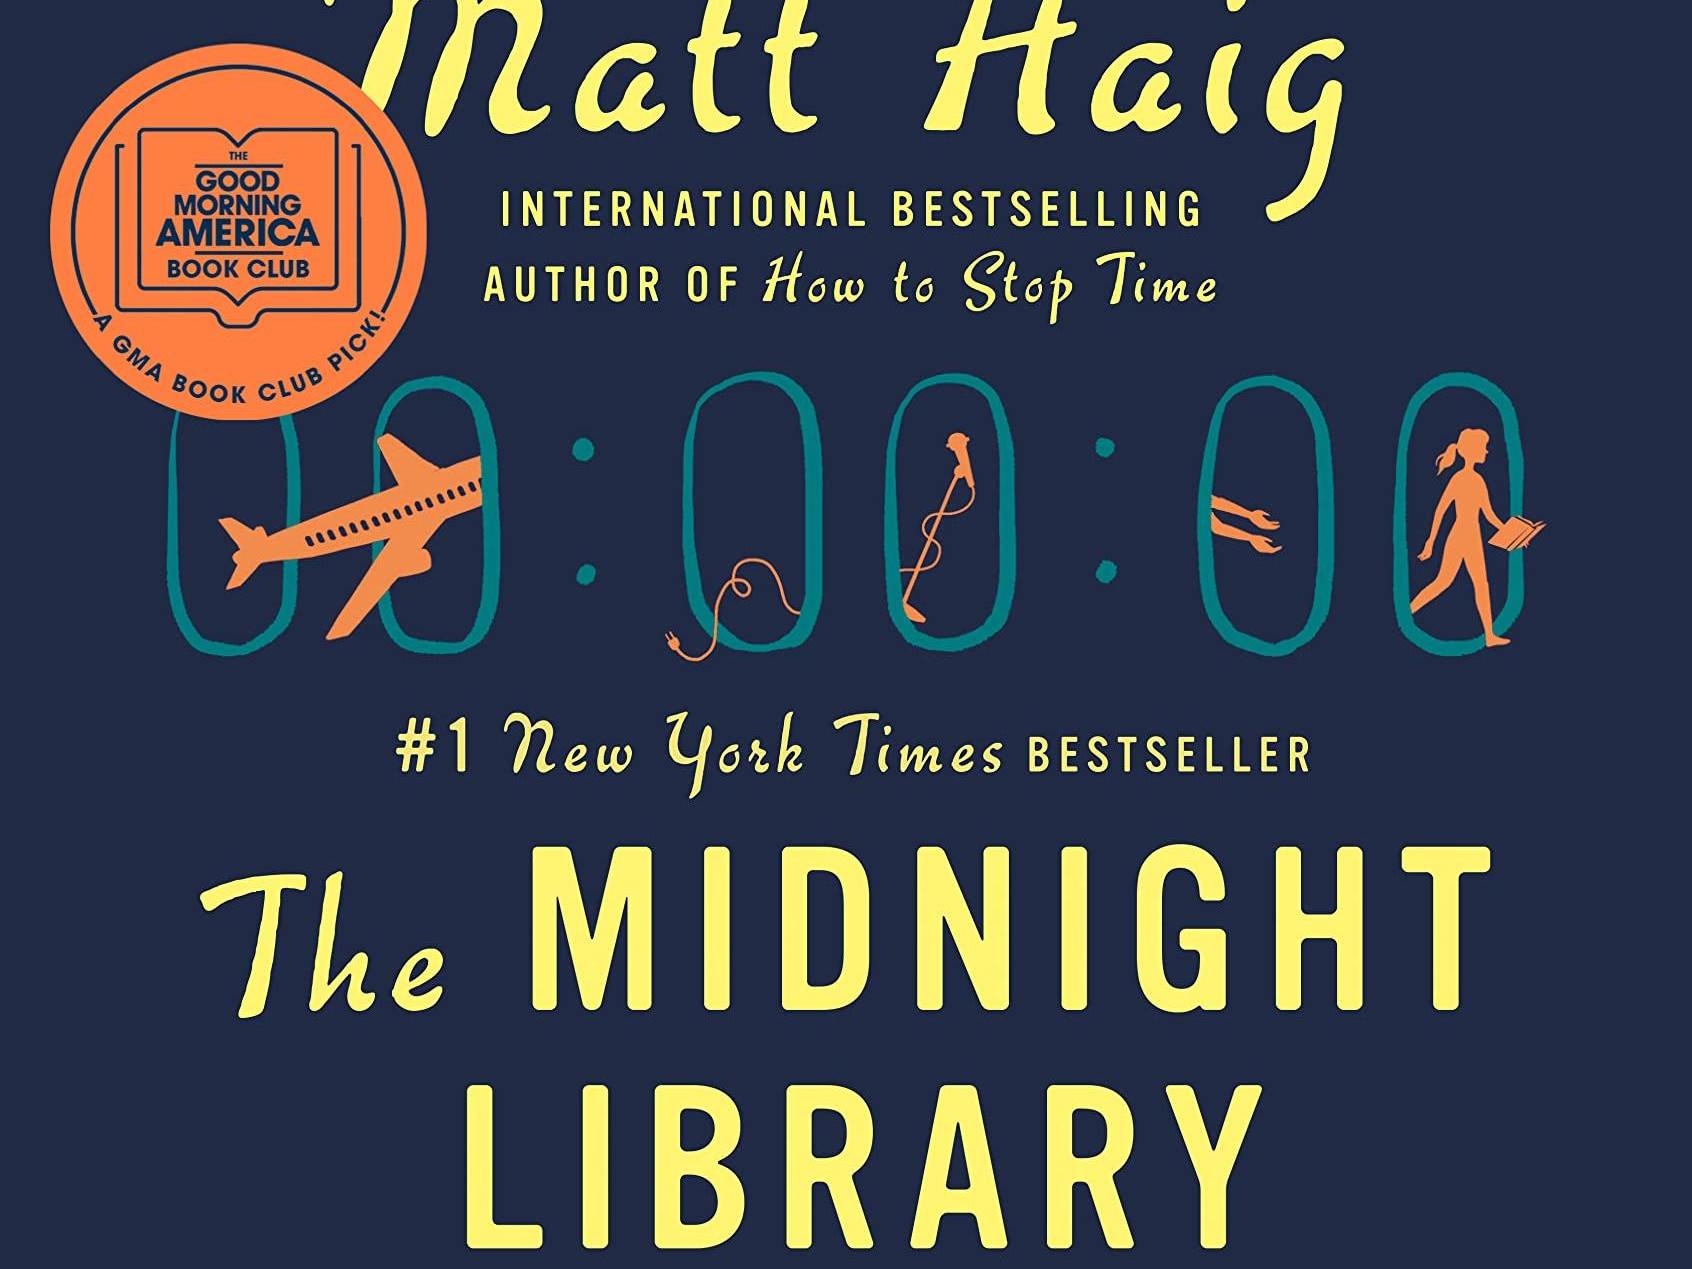 Book Discussion: The Midnight Library Dec 15th, 6:30pm